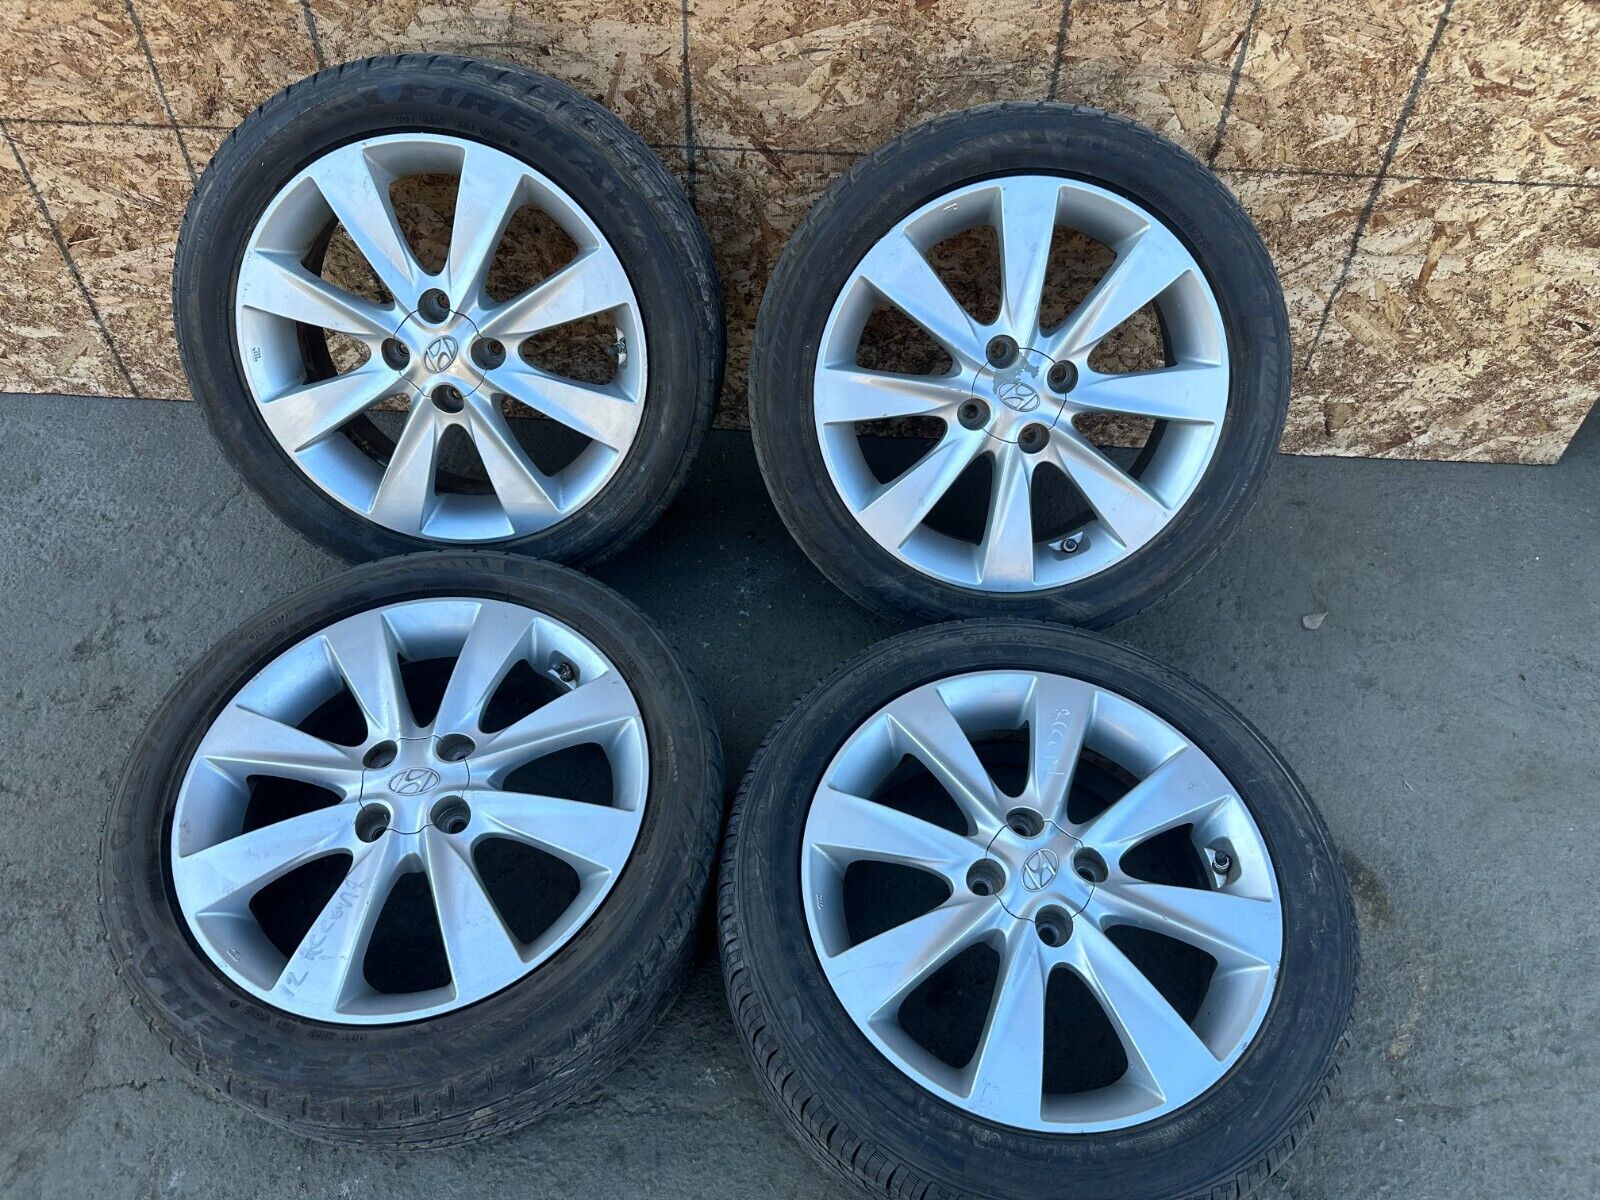 SET OF WHEELS RIMS AND TIRE 2012 - 2017 HYUNDAI ACCENT SET OF WHEELS OEM